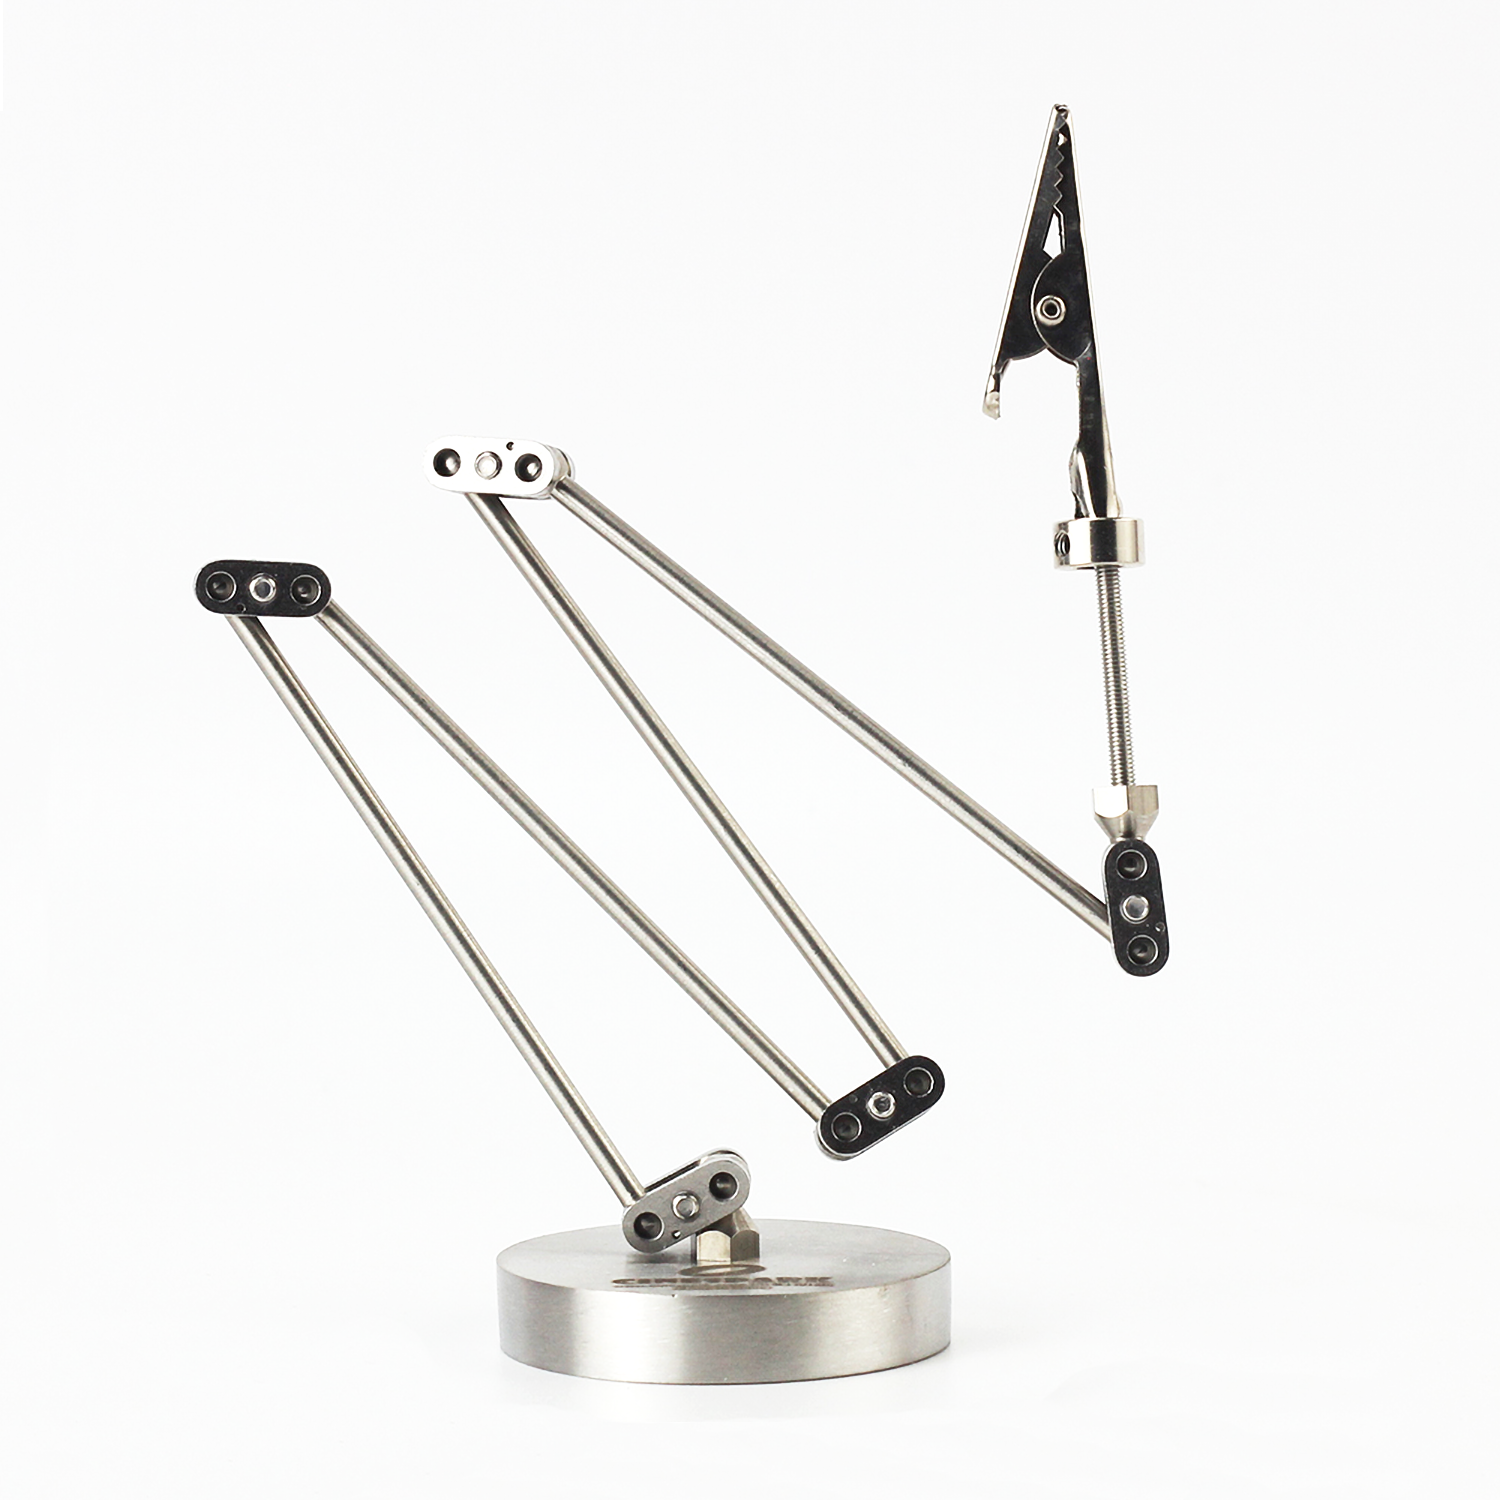 Light Stainless Steel Armature Rig for Stop Motion Animation (Max Payload 50g)